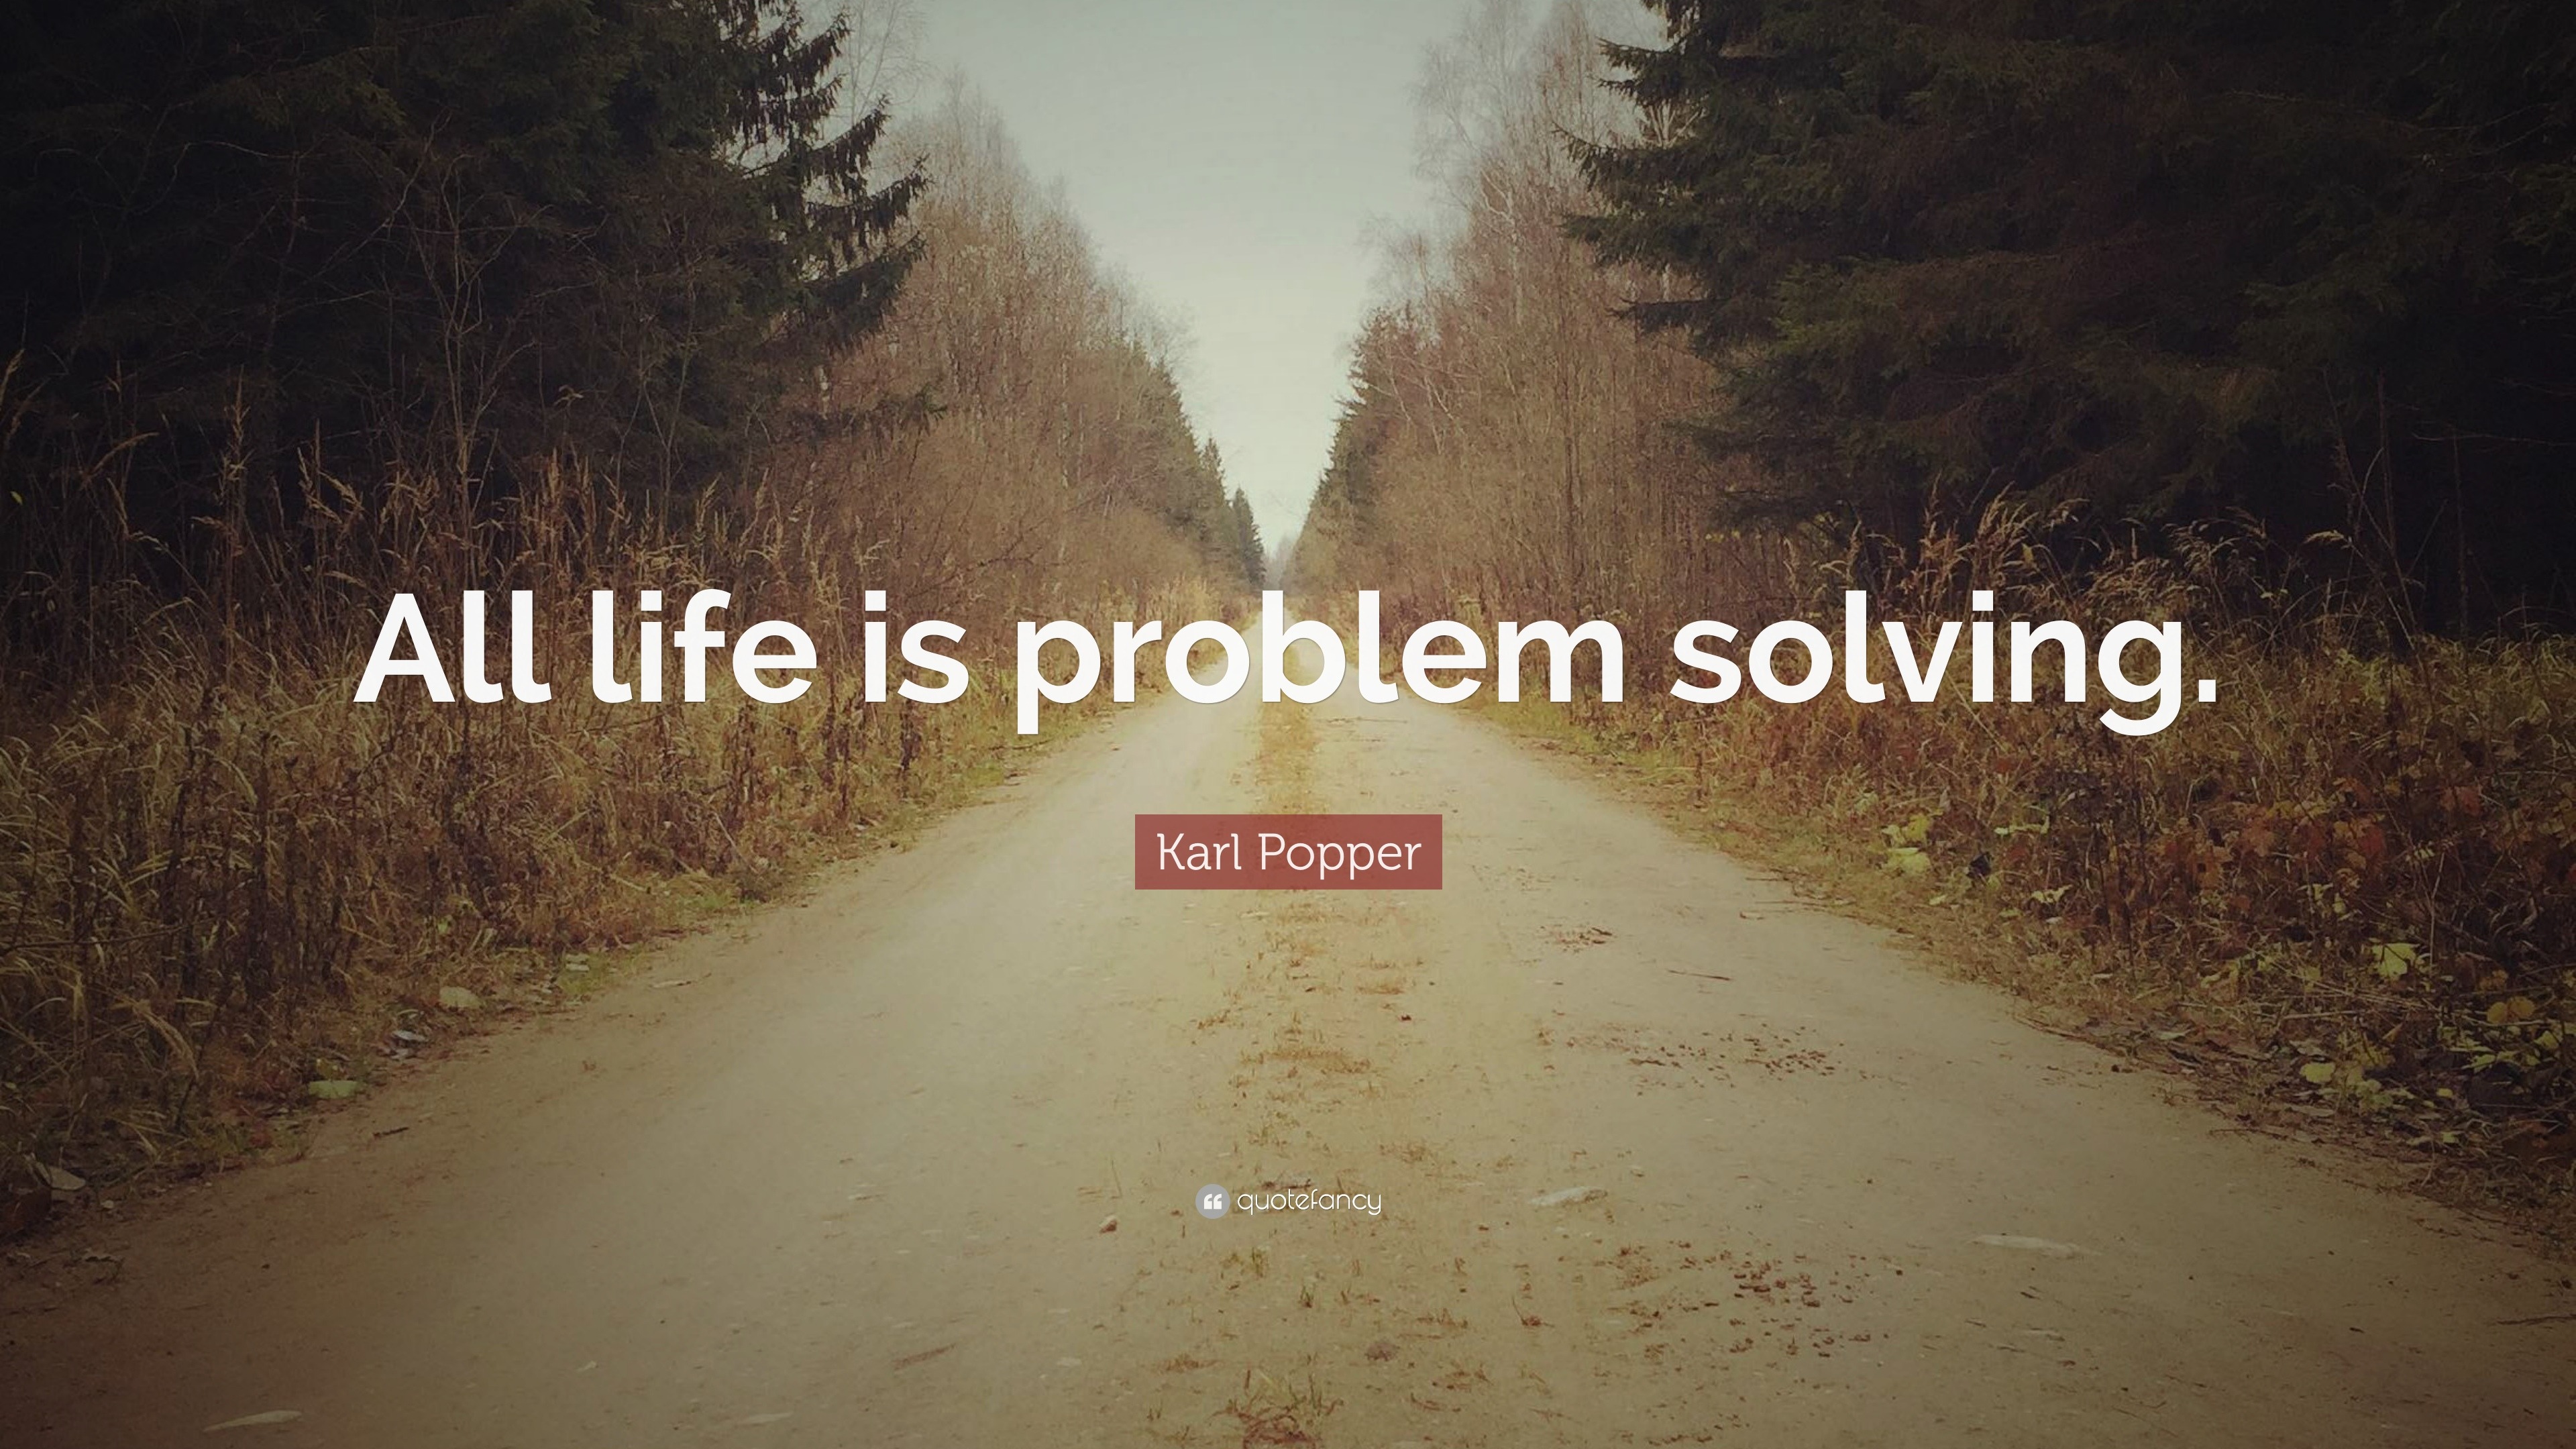 all life is problem solving meaning